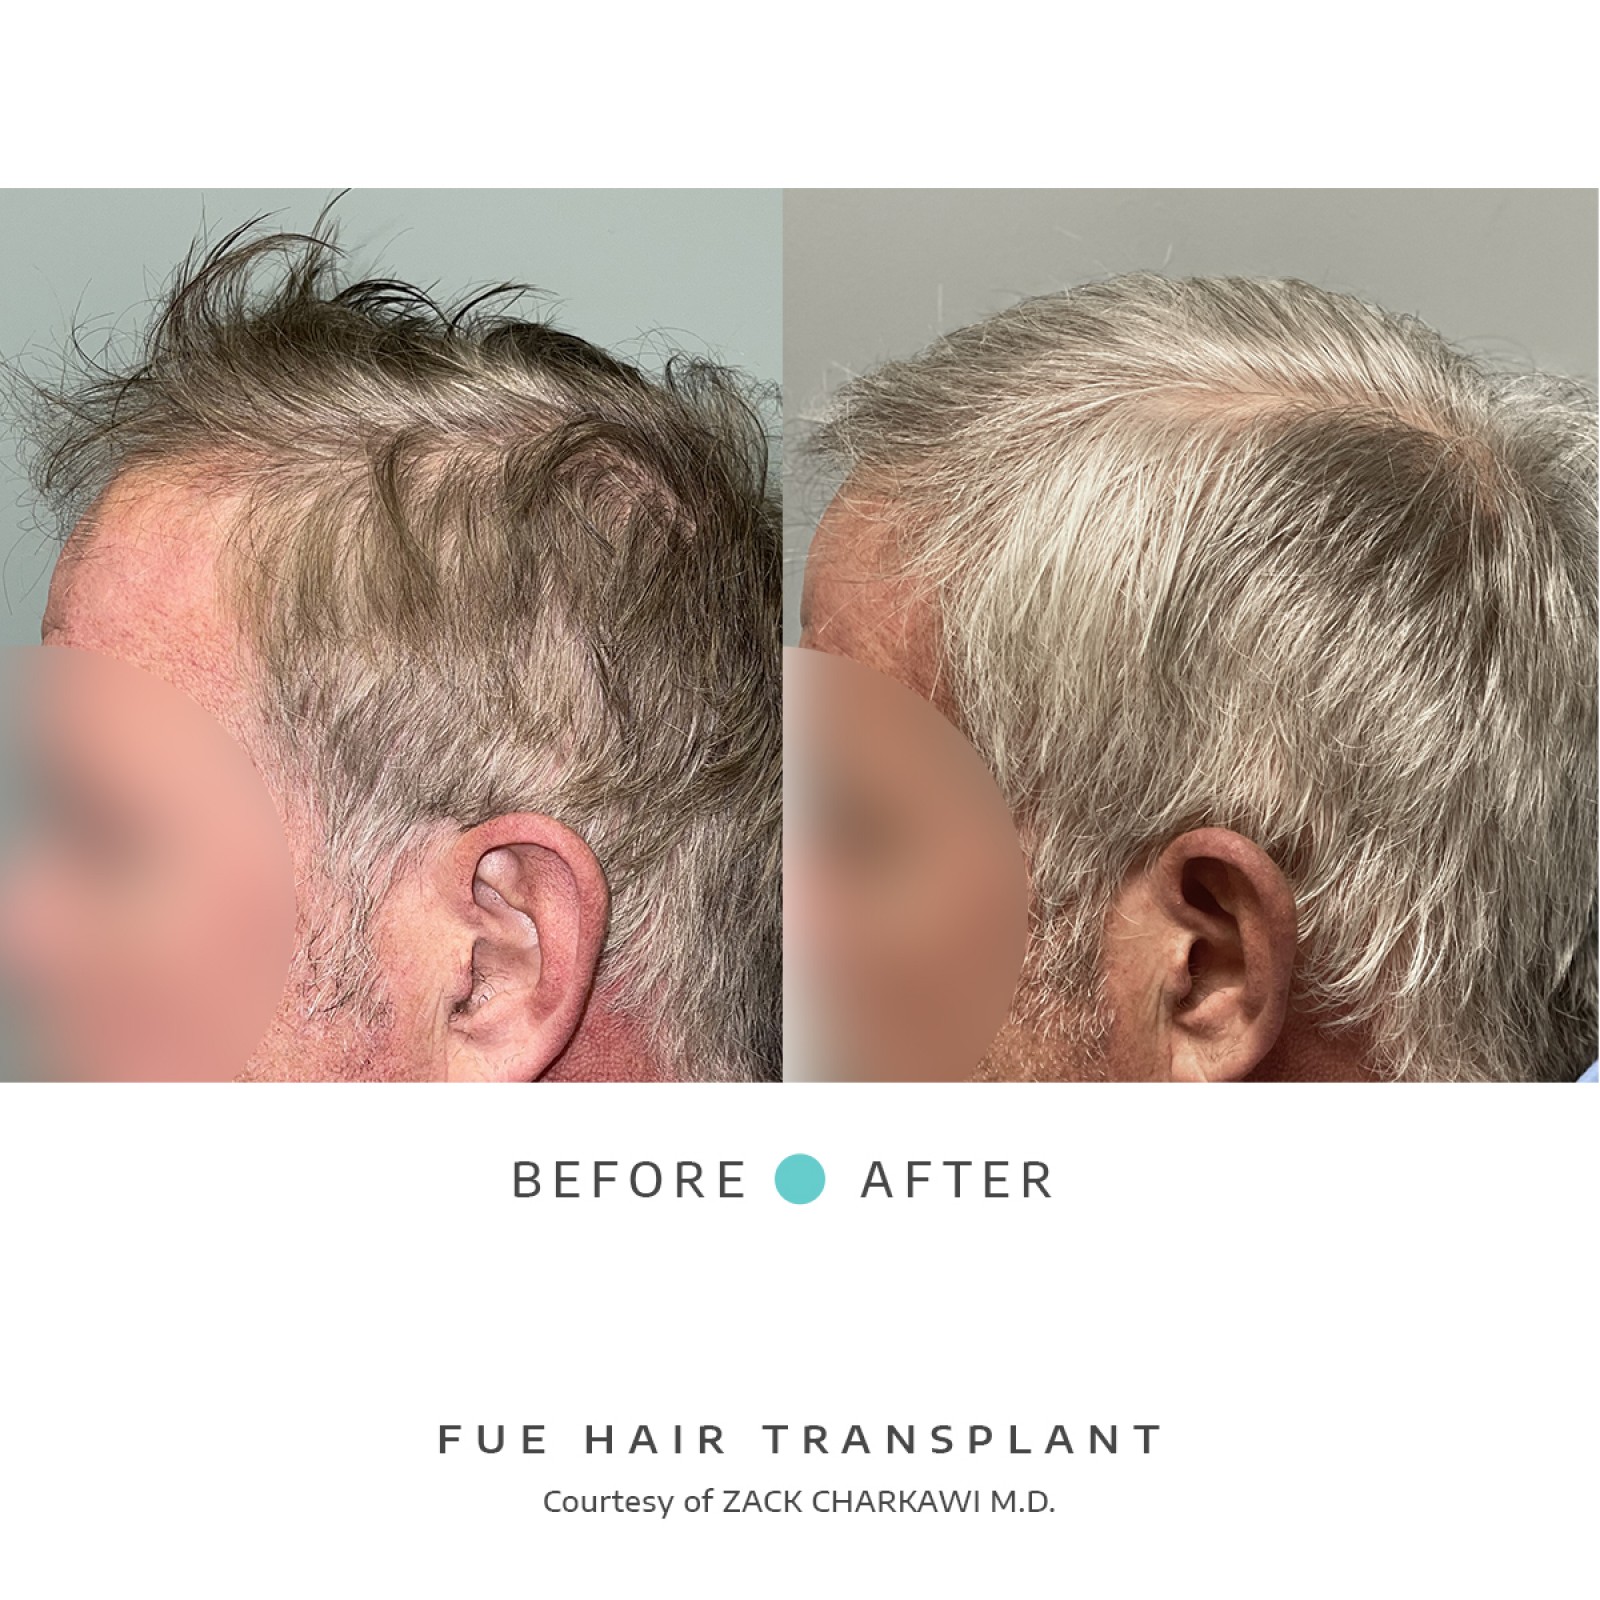 The before image reveals balding and thinning hair on a man's head. The after image displays luxuriant, natural-looking hair regrowth as a result of a hair transplant.